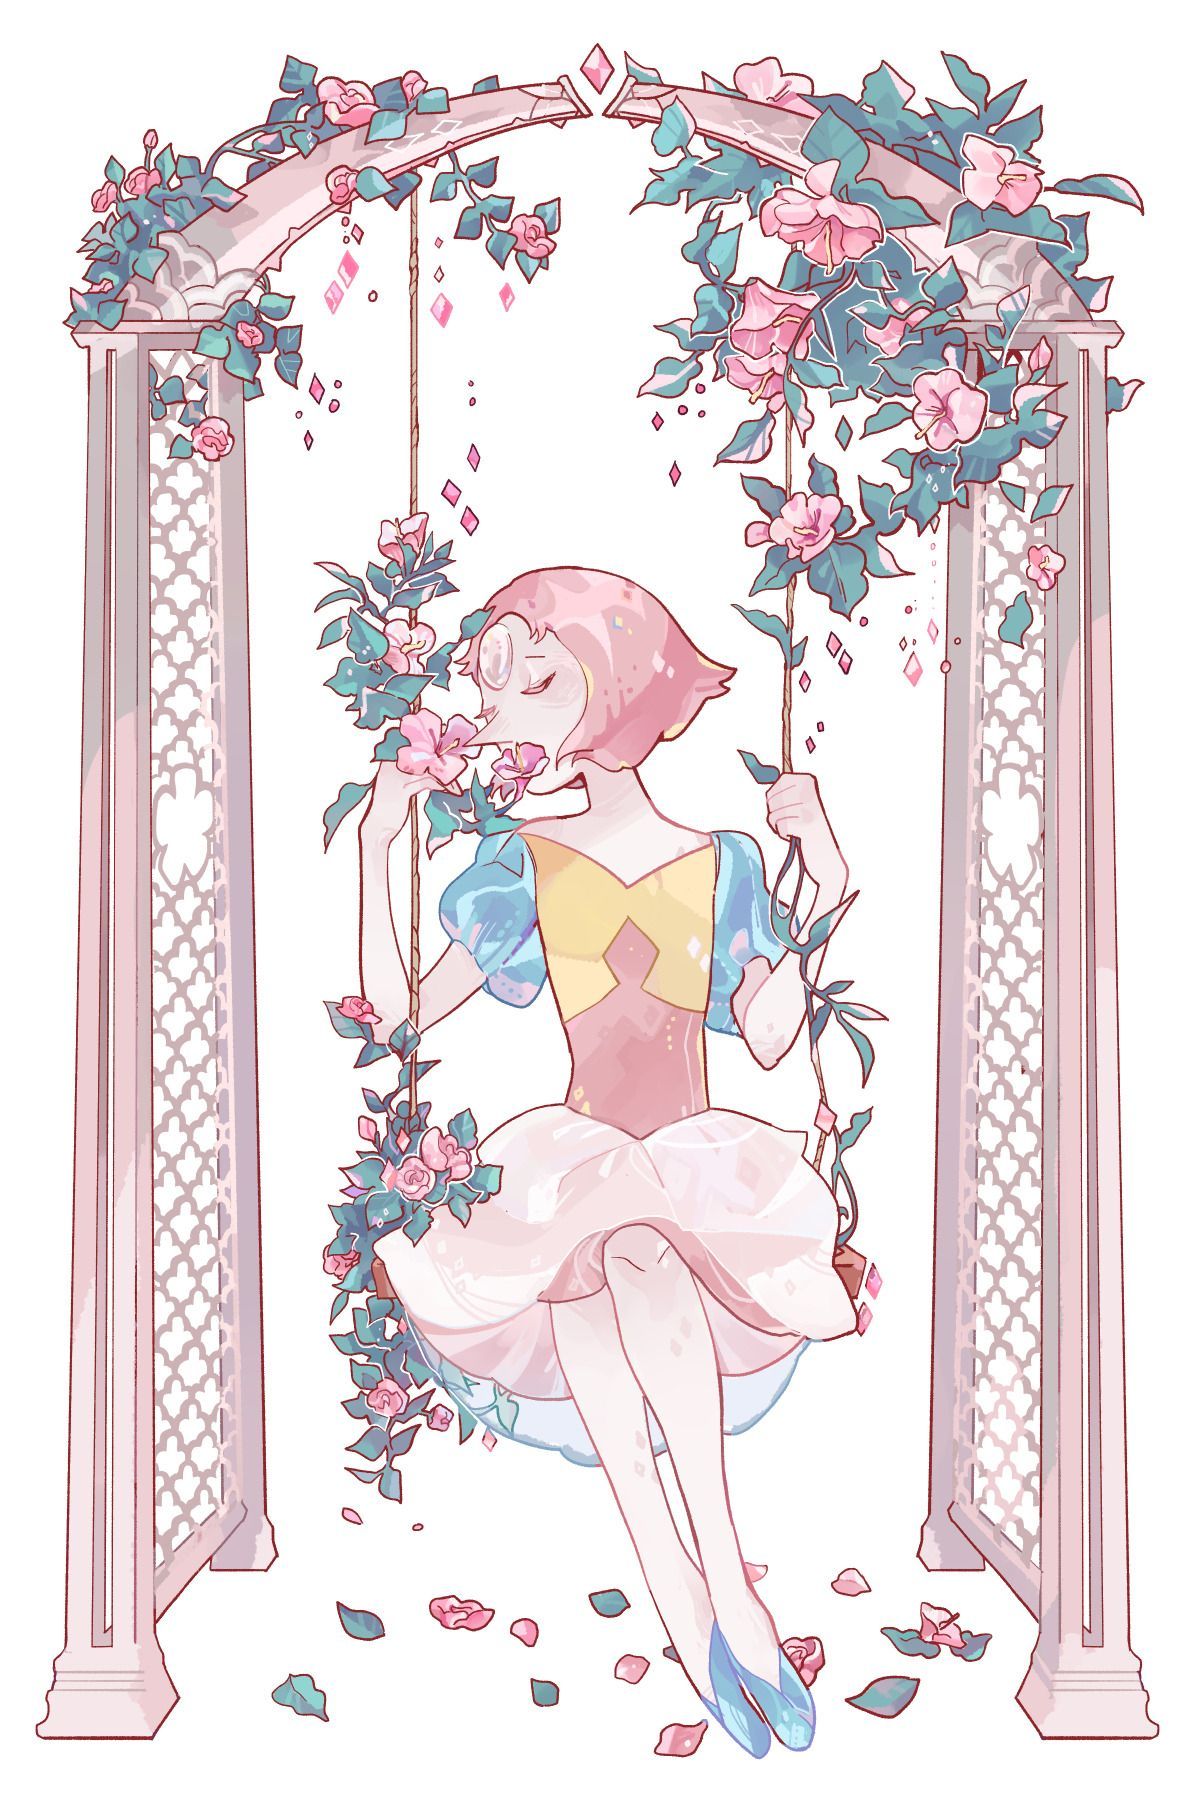 1200x1800 My Pearl Pale Rose Pearl Stand For Otakon Steven Universe Wallpaper Pearl Steven Universe Steven Universe Gem